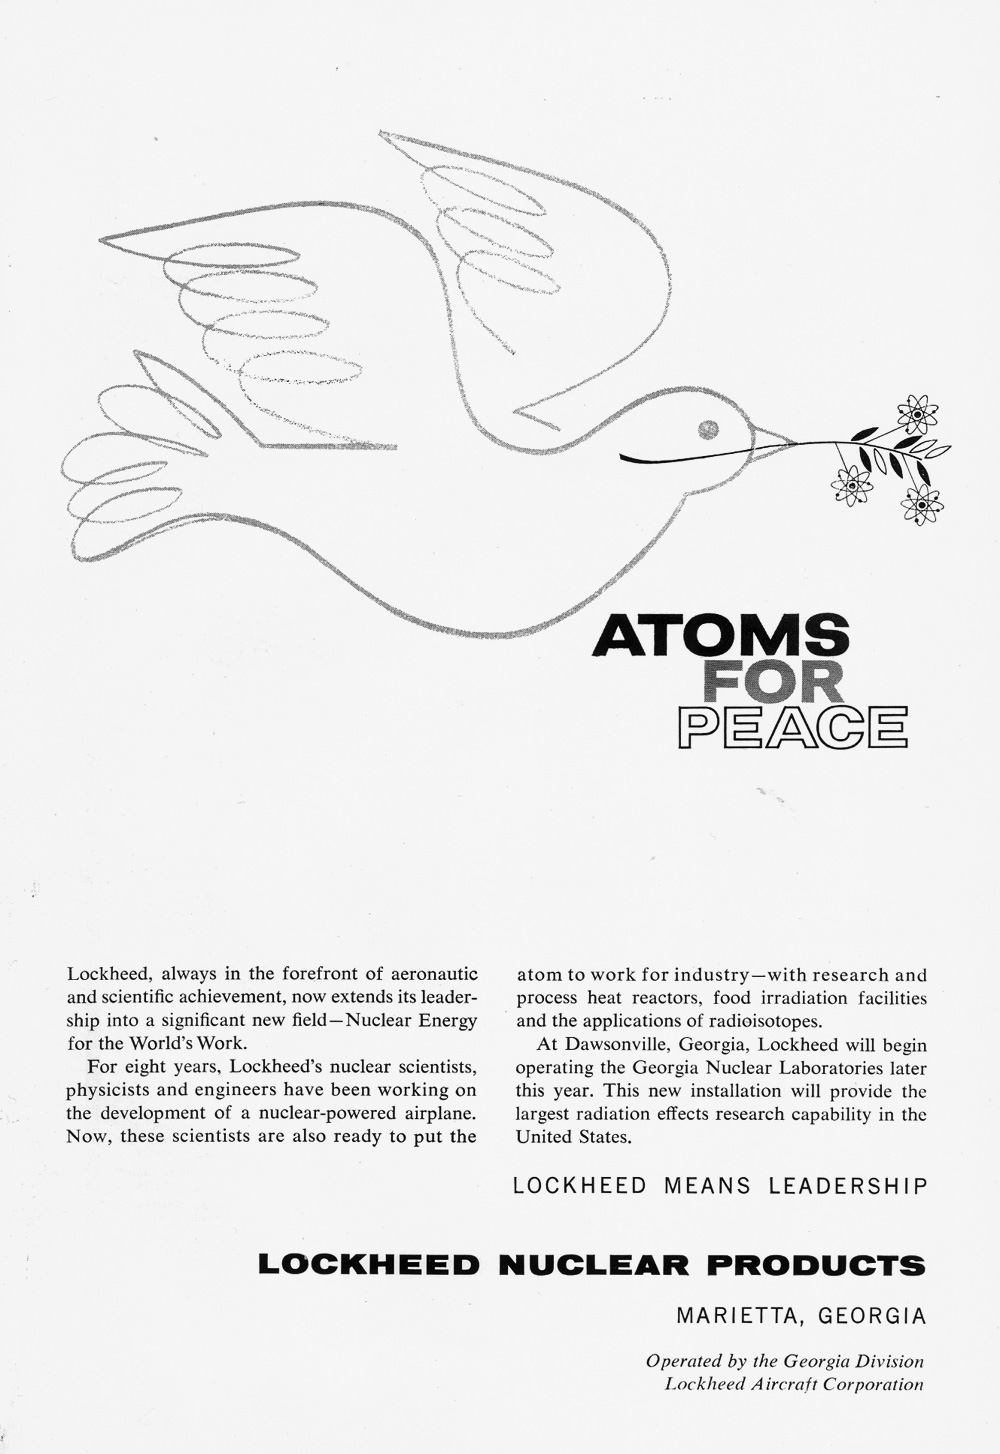 Lockheed Nuclear Products - Atoms for peace